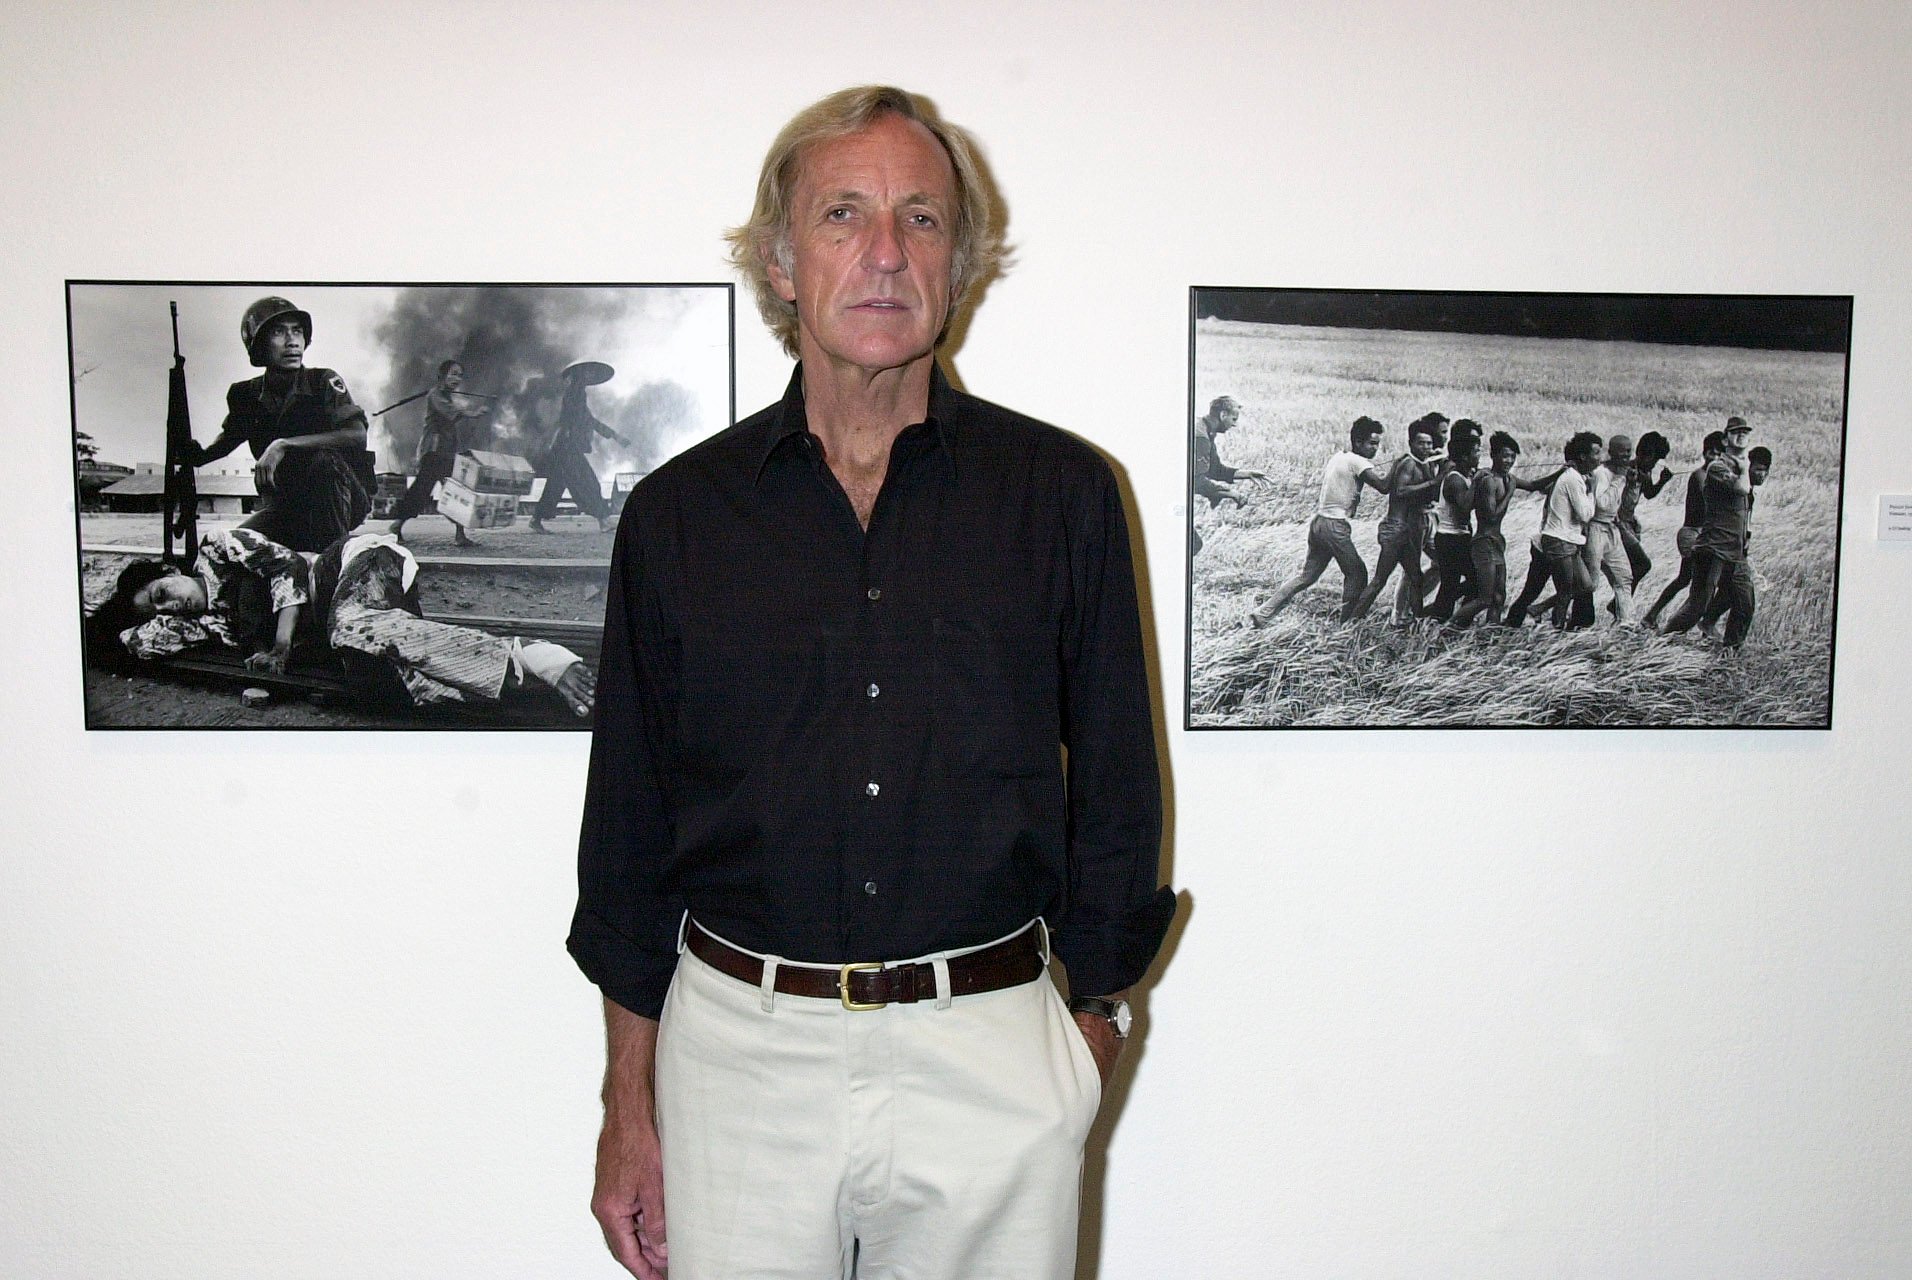 John Pilger attends an exhibition titled “John Pilger: Reporting The World” featuring work by various reportage photographers at London’s Barbican Art Gallery in 2001. Photo: Getty Images